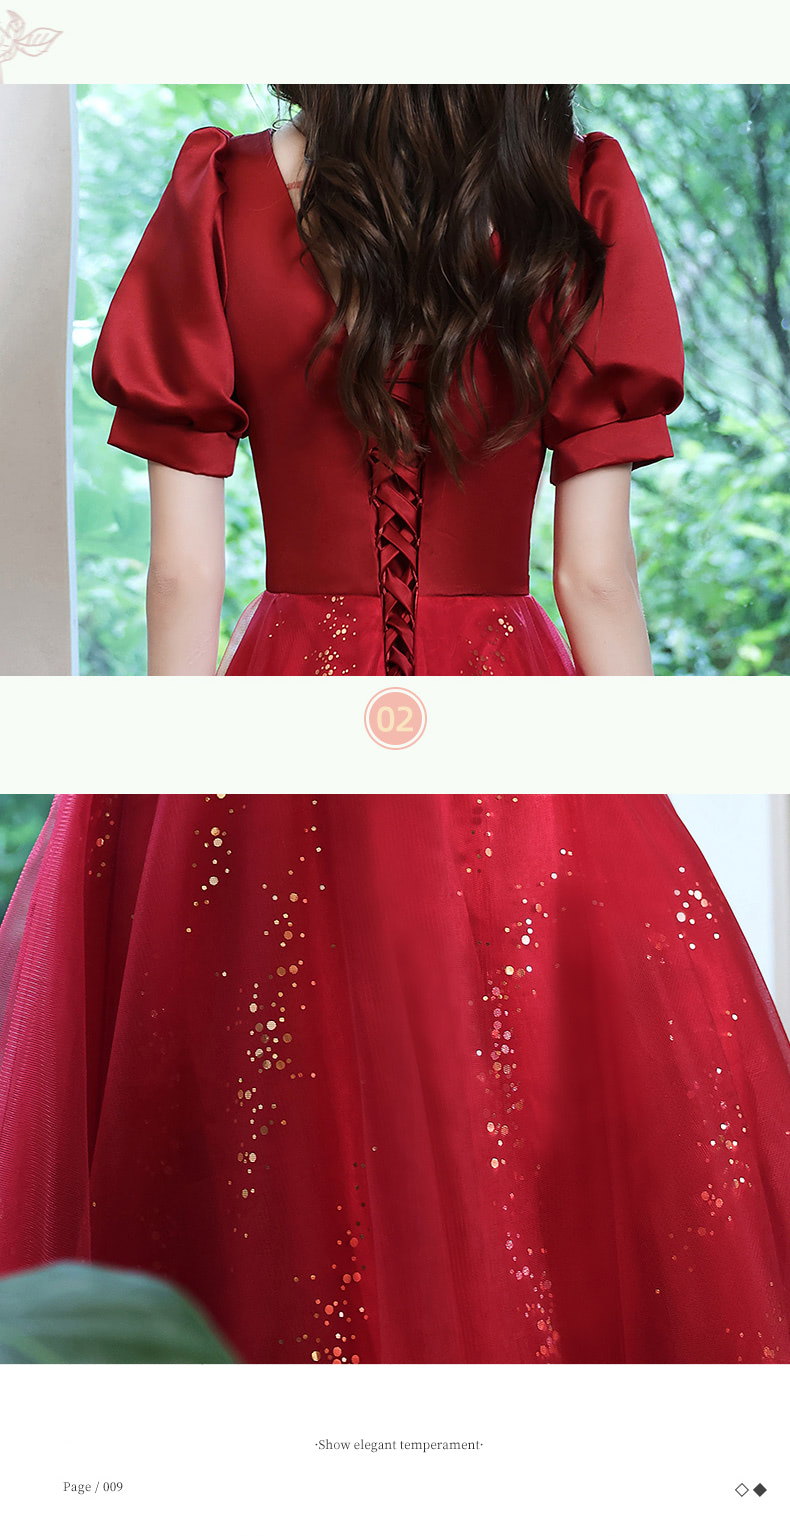 Square-Neck-Short-Puff-Sleeve-Burgundy-Tulle-Prom-Party-Dress12.jpg